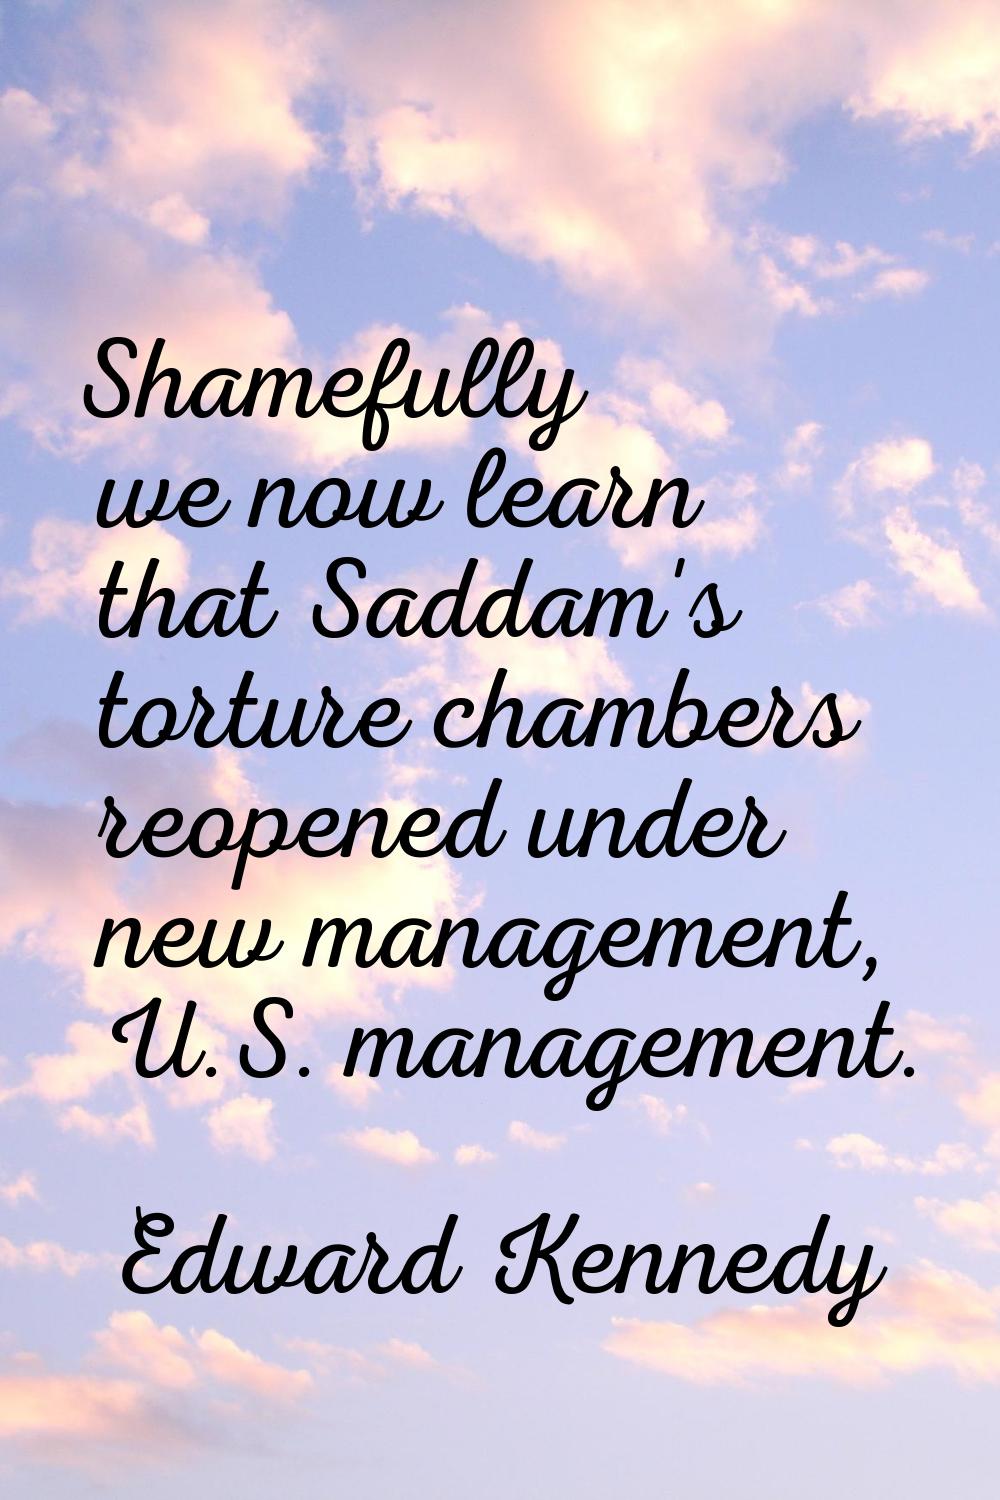 Shamefully we now learn that Saddam's torture chambers reopened under new management, U.S. manageme